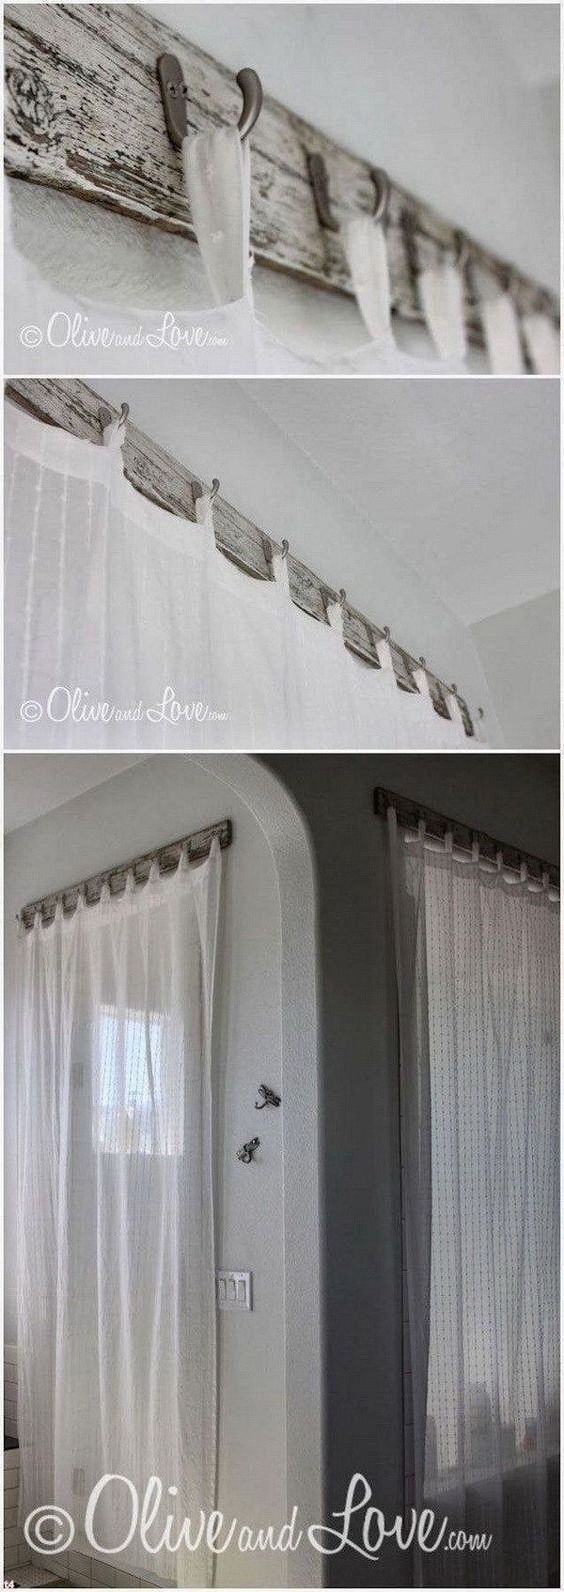 Create Your Own Curtain Hangers - A DIY Project